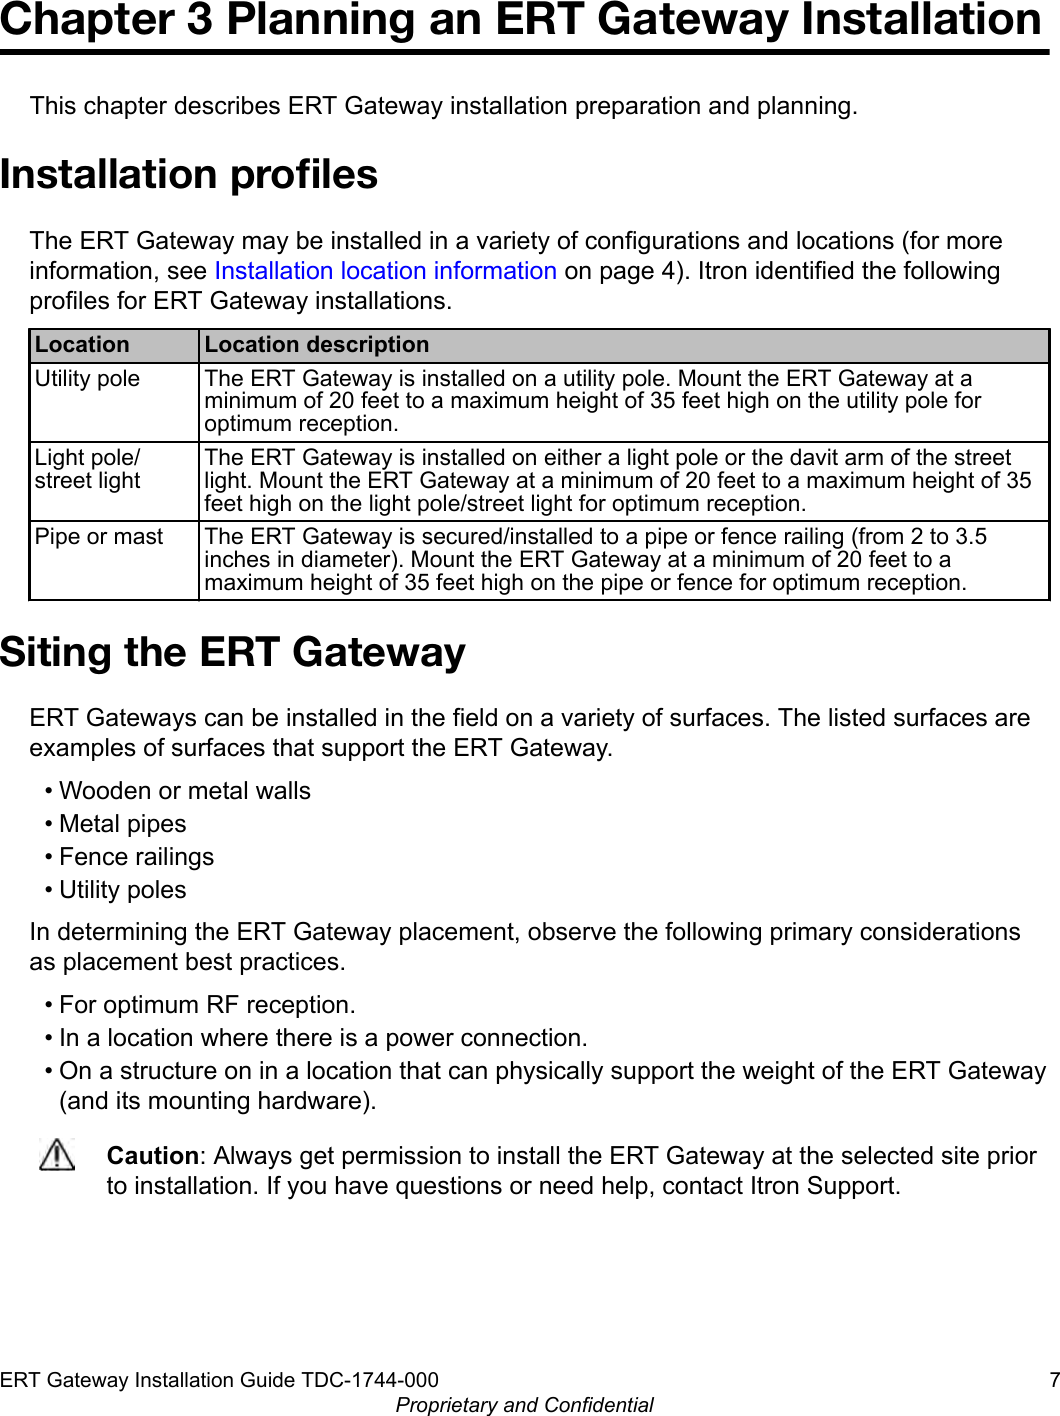 Chapter 3 Planning an ERT Gateway InstallationThis chapter describes ERT Gateway installation preparation and planning.Installation proﬁlesThe ERT Gateway may be installed in a variety of configurations and locations (for moreinformation, see Installation location information on page 4). Itron identified the followingprofiles for ERT Gateway installations.Location Location descriptionUtility pole The ERT Gateway is installed on a utility pole. Mount the ERT Gateway at aminimum of 20 feet to a maximum height of 35 feet high on the utility pole foroptimum reception.Light pole/street lightThe ERT Gateway is installed on either a light pole or the davit arm of the streetlight. Mount the ERT Gateway at a minimum of 20 feet to a maximum height of 35feet high on the light pole/street light for optimum reception.Pipe or mast The ERT Gateway is secured/installed to a pipe or fence railing (from 2 to 3.5inches in diameter). Mount the ERT Gateway at a minimum of 20 feet to amaximum height of 35 feet high on the pipe or fence for optimum reception.Siting the ERT GatewayERT Gateways can be installed in the field on a variety of surfaces. The listed surfaces areexamples of surfaces that support the ERT Gateway.• Wooden or metal walls• Metal pipes• Fence railings• Utility polesIn determining the ERT Gateway placement, observe the following primary considerationsas placement best practices.• For optimum RF reception.• In a location where there is a power connection.• On a structure on in a location that can physically support the weight of the ERT Gateway(and its mounting hardware).Caution: Always get permission to install the ERT Gateway at the selected site priorto installation. If you have questions or need help, contact Itron Support.ERT Gateway Installation Guide TDC-1744-000 7Proprietary and Confidential